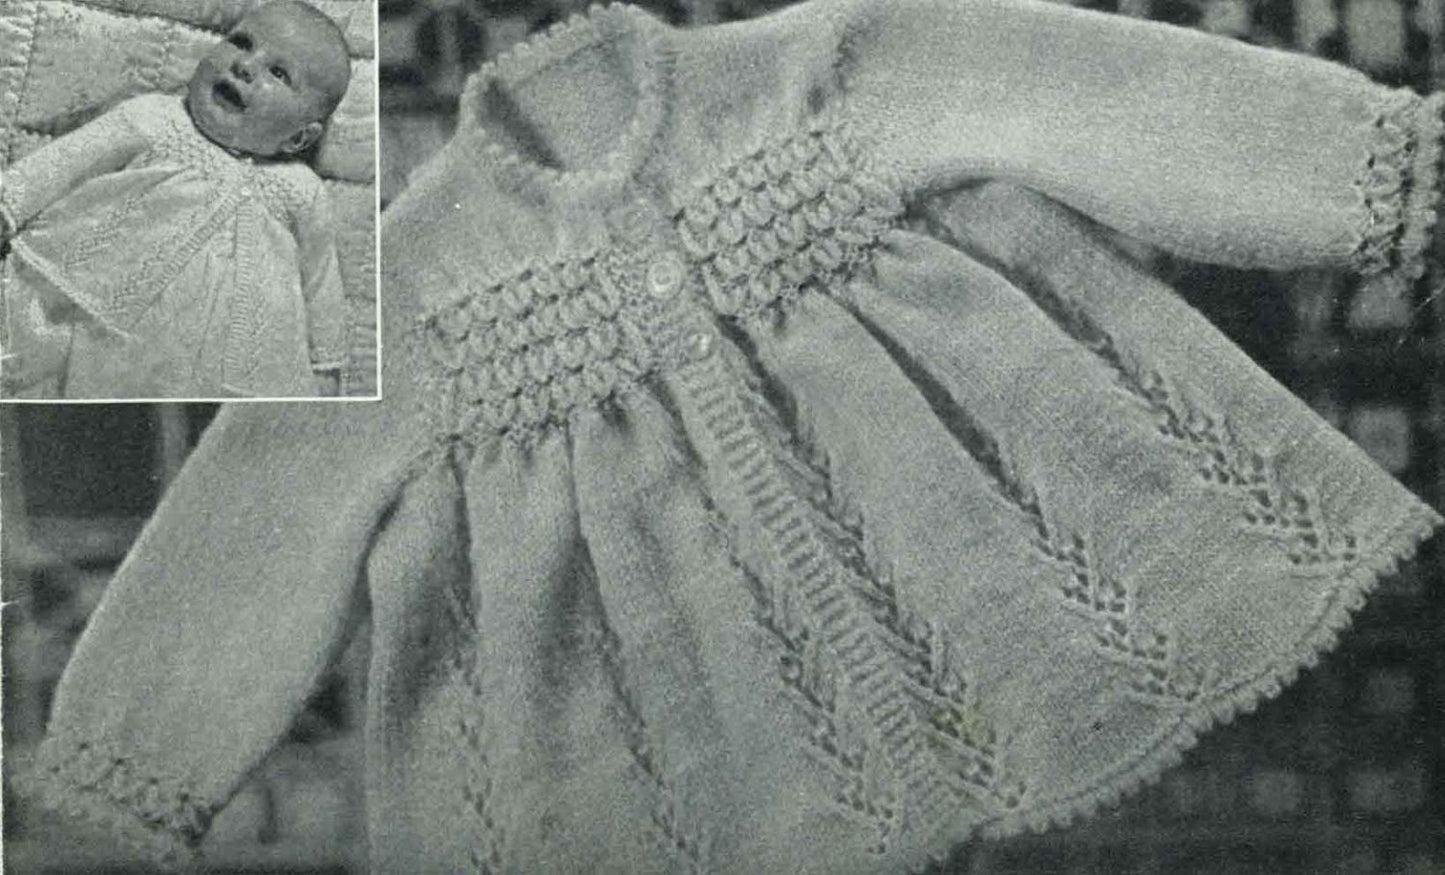 Baby Matinee Coat in 3 Styles, 1-6 months, 3ply, 50s Knitting Pattern, P&B 576